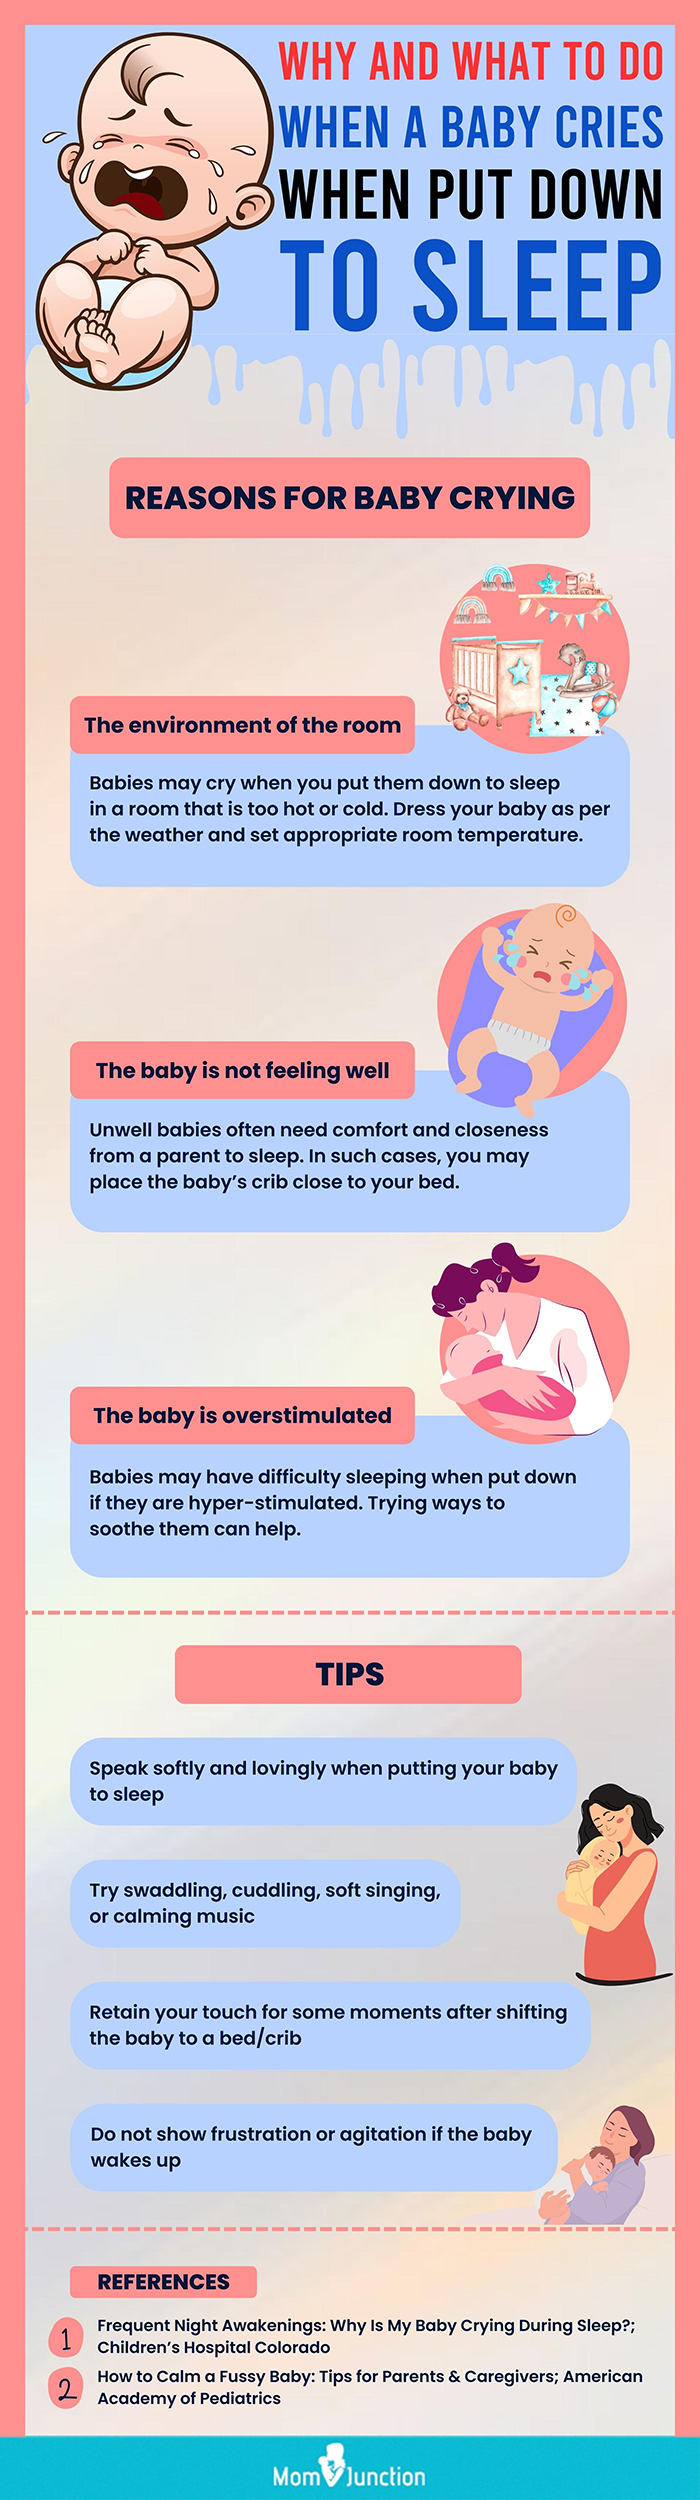 what to do when baby cries when put down to sleep (infographic)